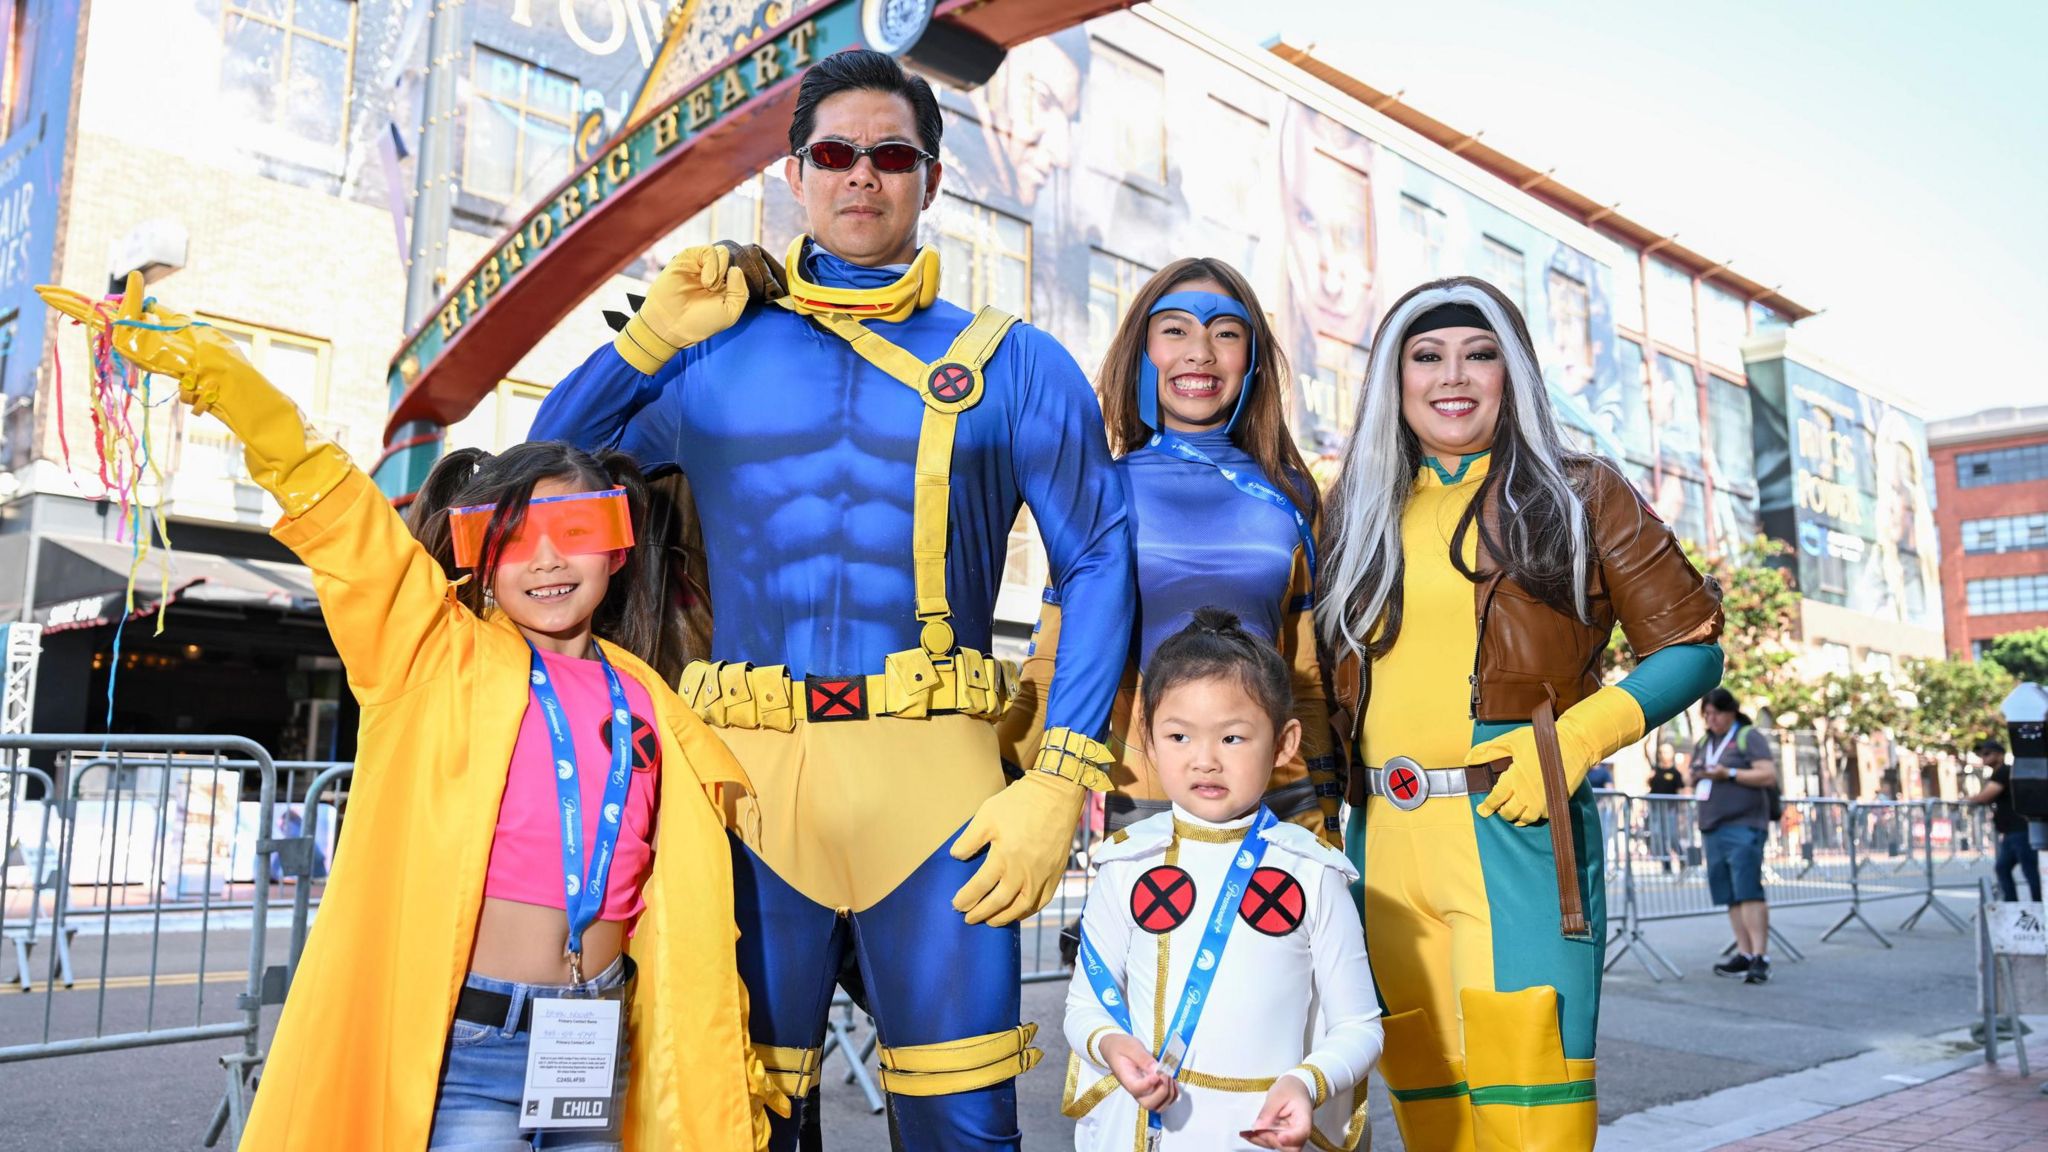 A family of cosplayers dressed as X-Men